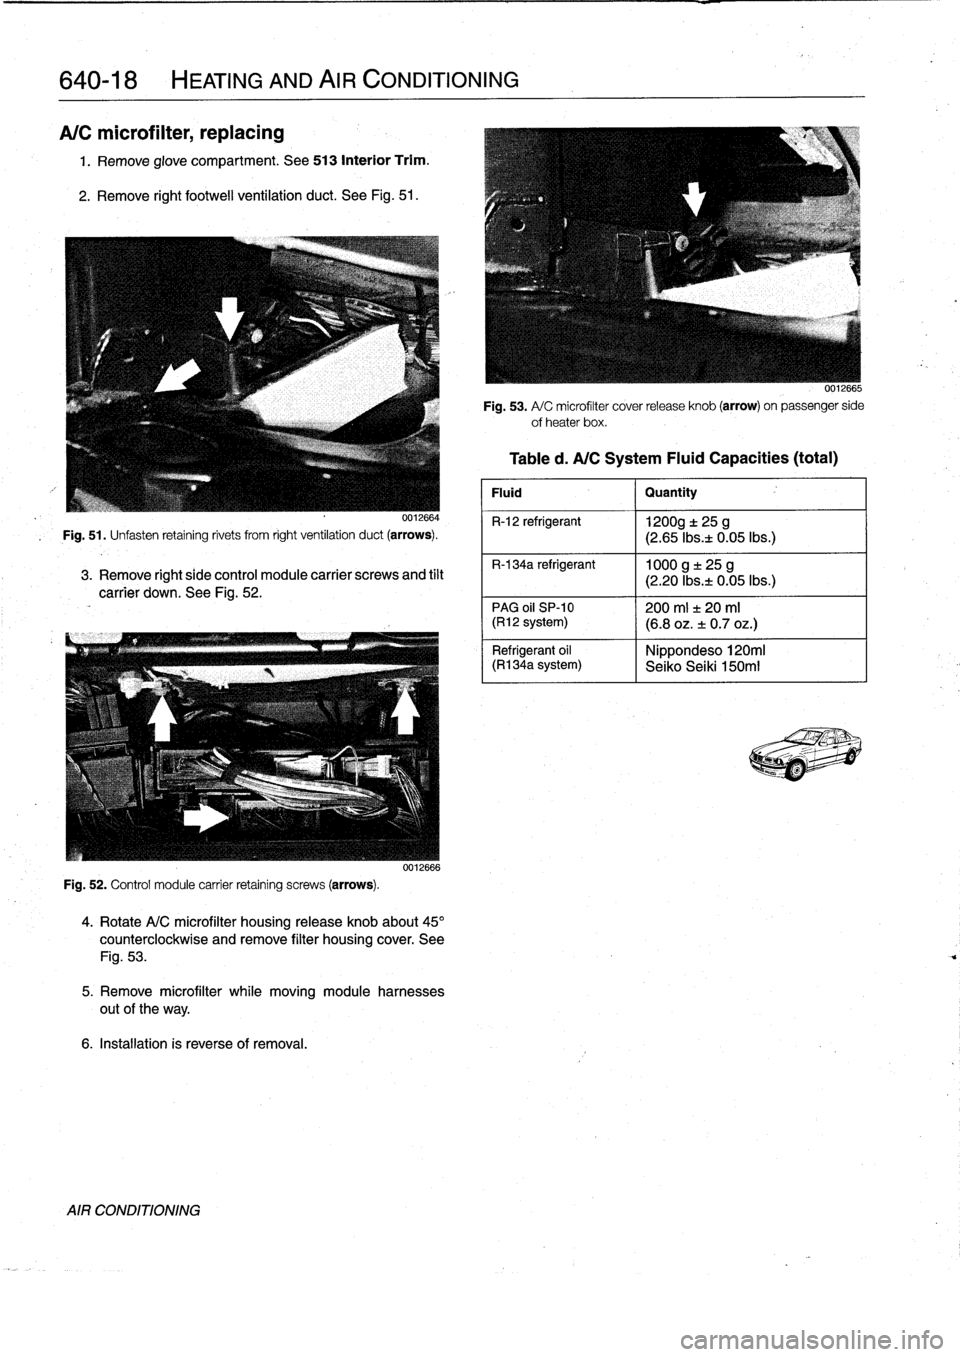 BMW 323i 1998 E36 Workshop Manual 
640-18

	

HEATING
AND
AIR
CONDITIONING

A/C
microfilter,
replacing

1
.
Remove
glove
compartment
.
See
513
Interior
Trim
.

2
.
Remove
right
footwell
ventilation
duct
.
See
Fig
.
51
.

0012664

Fig
